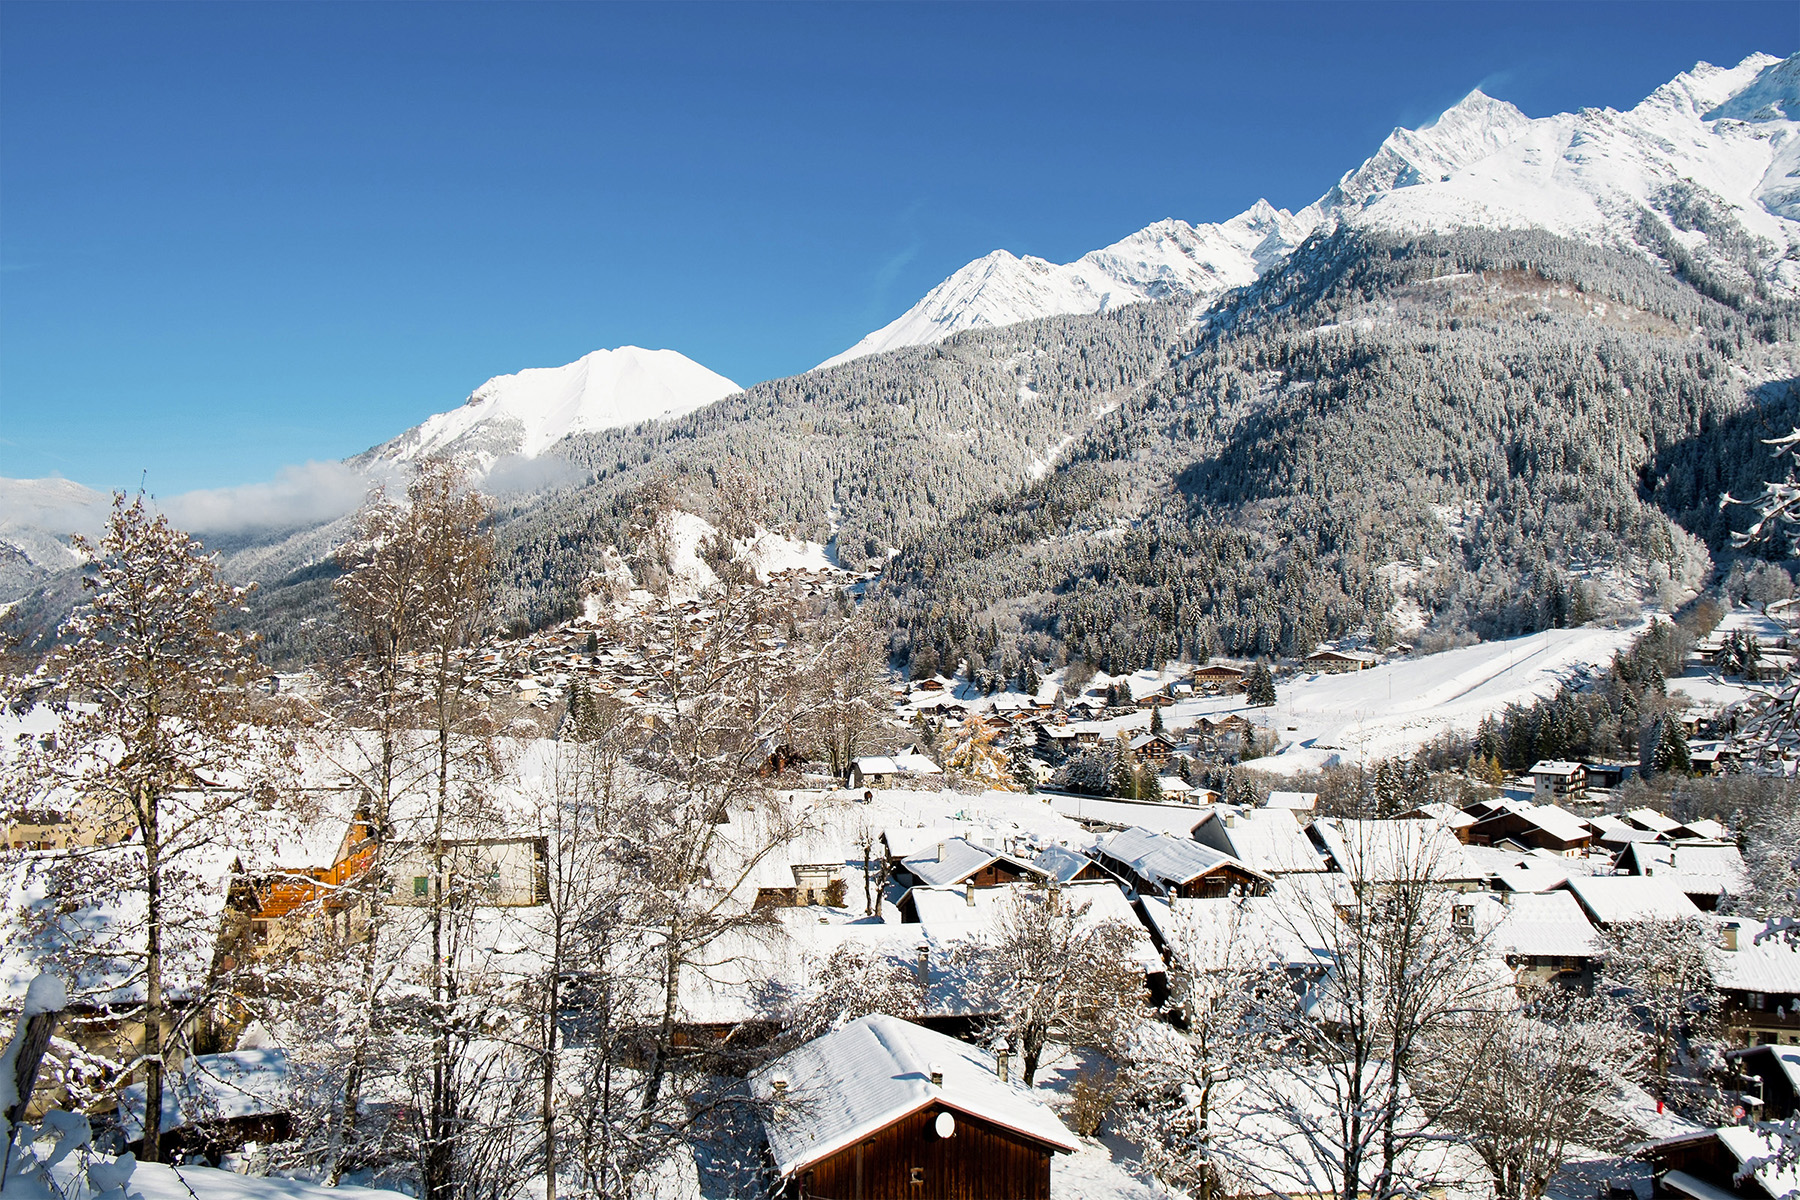 16.<strong> Les Contamines-Montjoie, France</strong><br><strong>The skinny:</strong> 108% increase; French Alpine village near Chamonix<br><strong>Choicest digs:</strong> <a href="https://www.airbnb.com/rooms/11393206?source_impression_id=p3_1572464543_pxyb0N8ZbaejgD5H">Traditional Mountain Chalet</a>